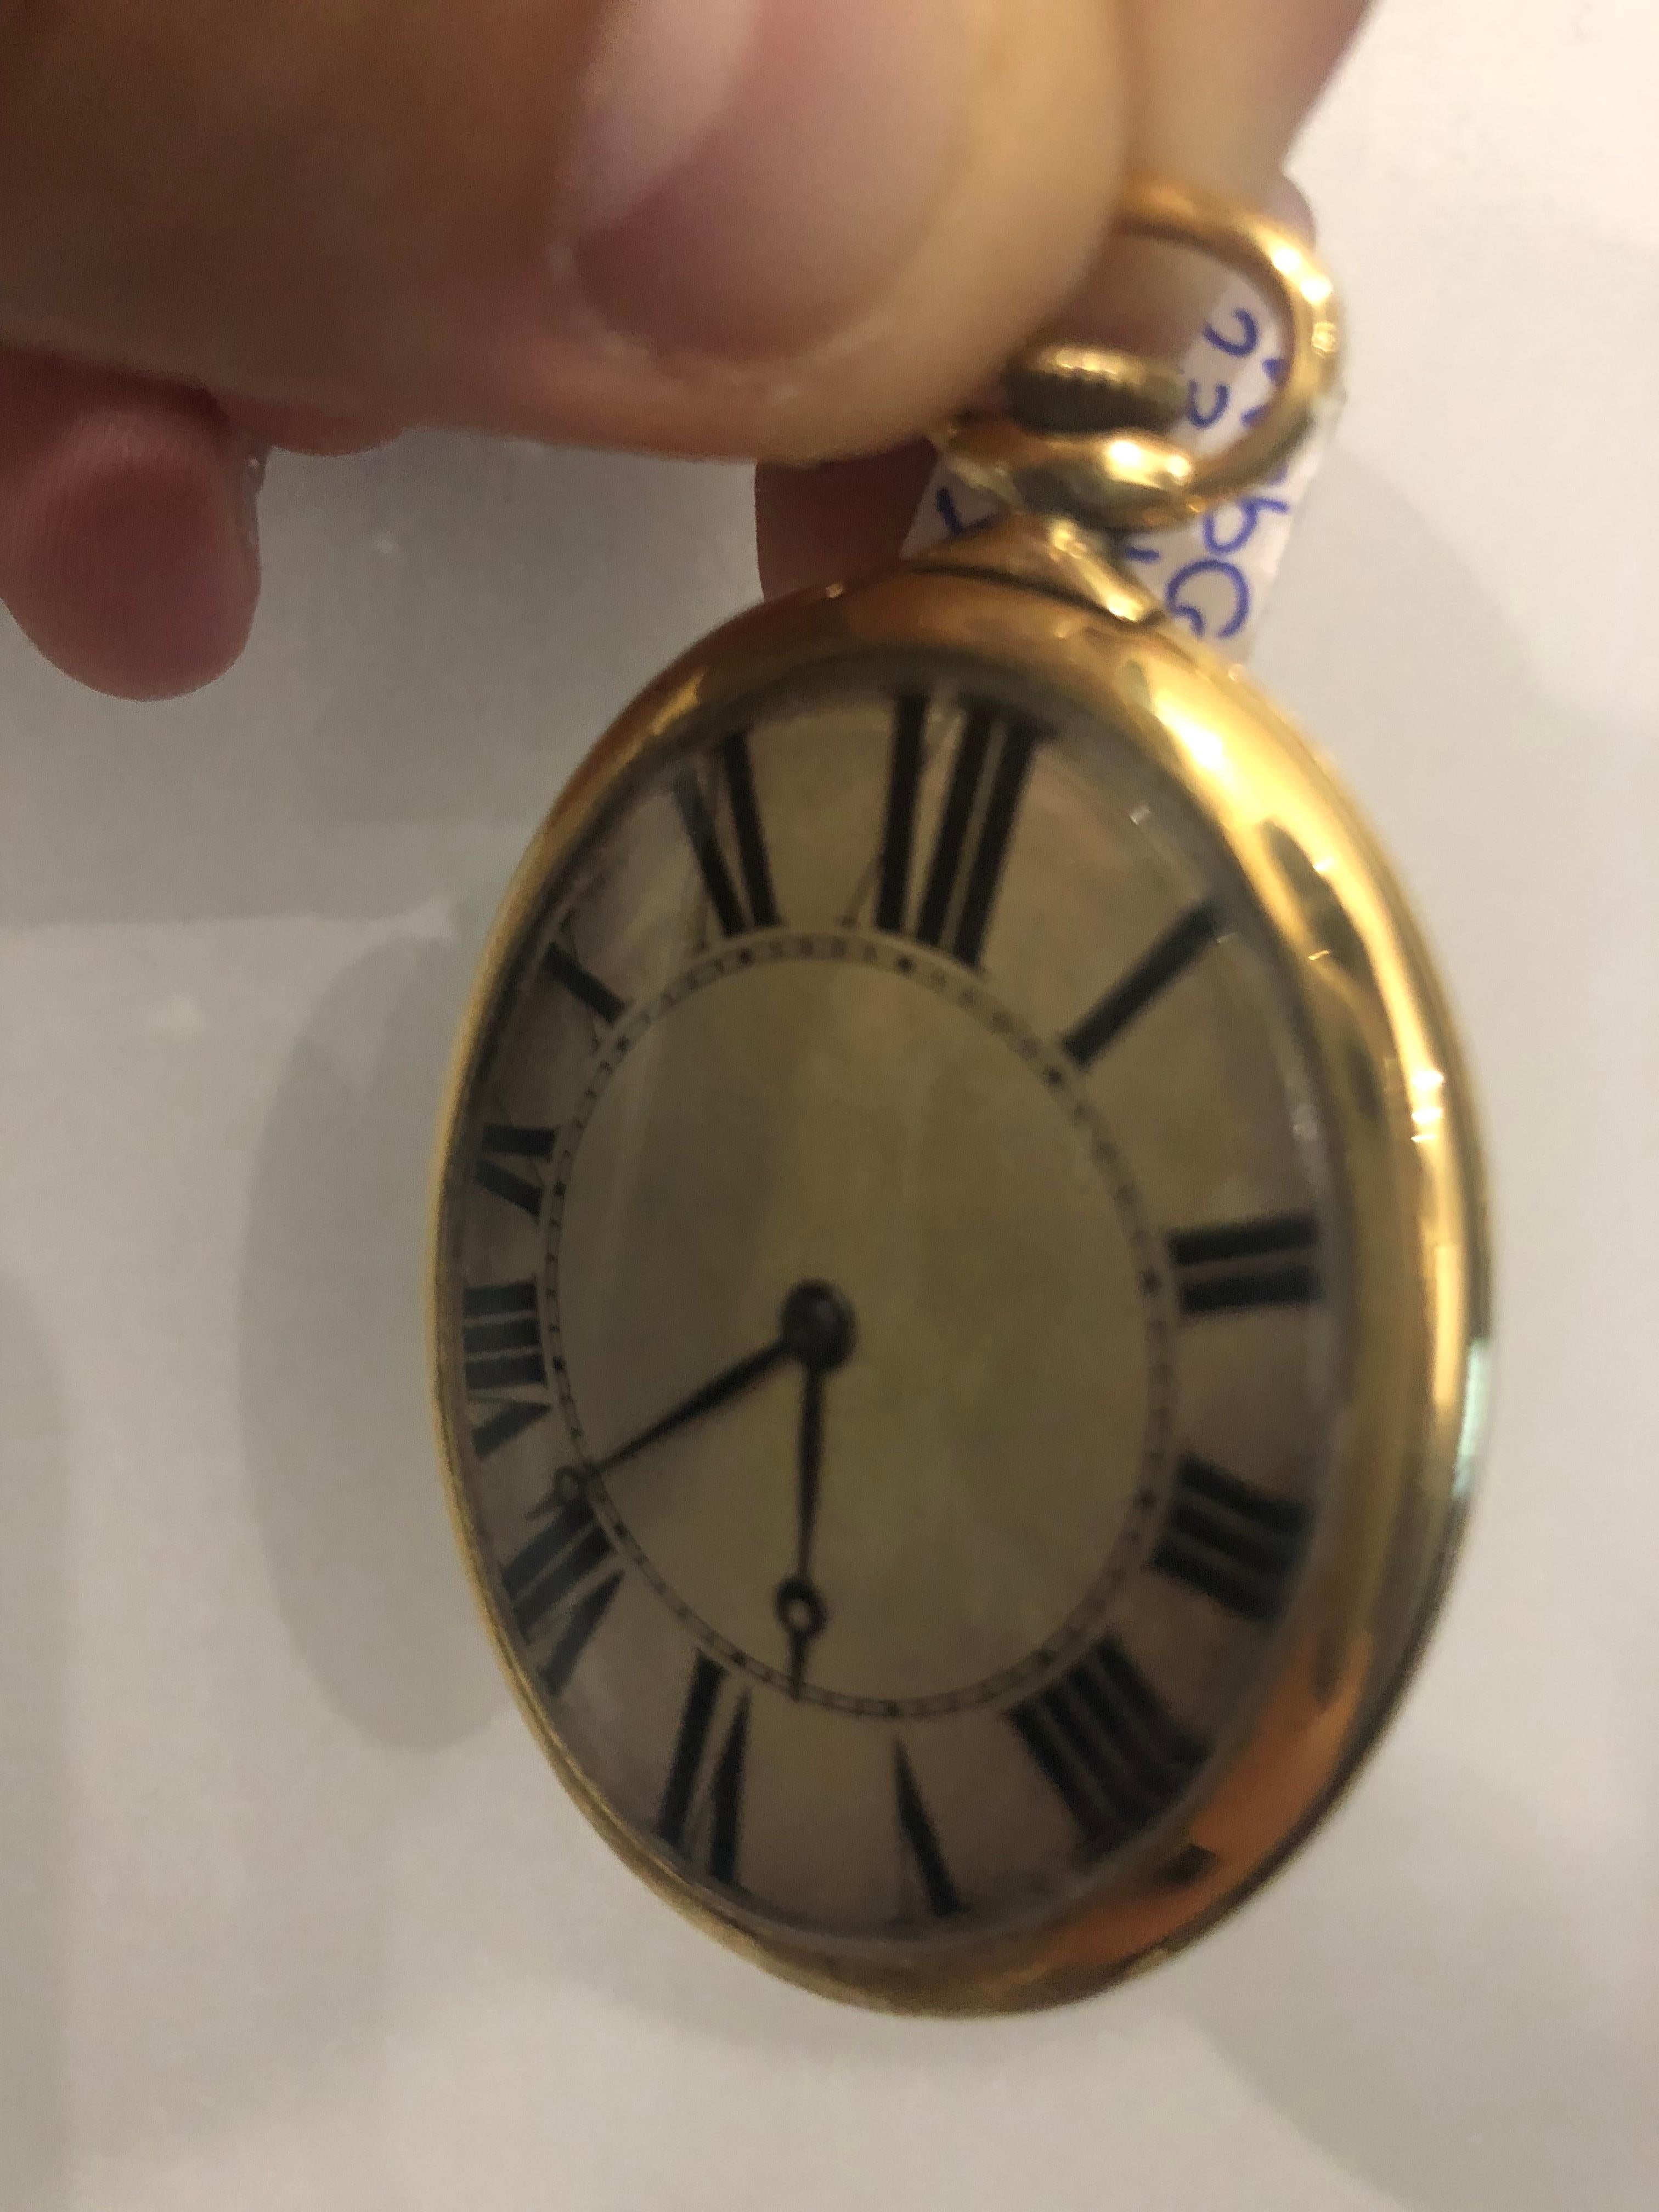 An 18k Yellow Gold Vintage Pocket Watch, silver dial with roman numerals and blue steel Breguet Moon Hands, a fixed polished 18k yellow gold bezel, a polished 18k yellow gold case, case back engraved with 